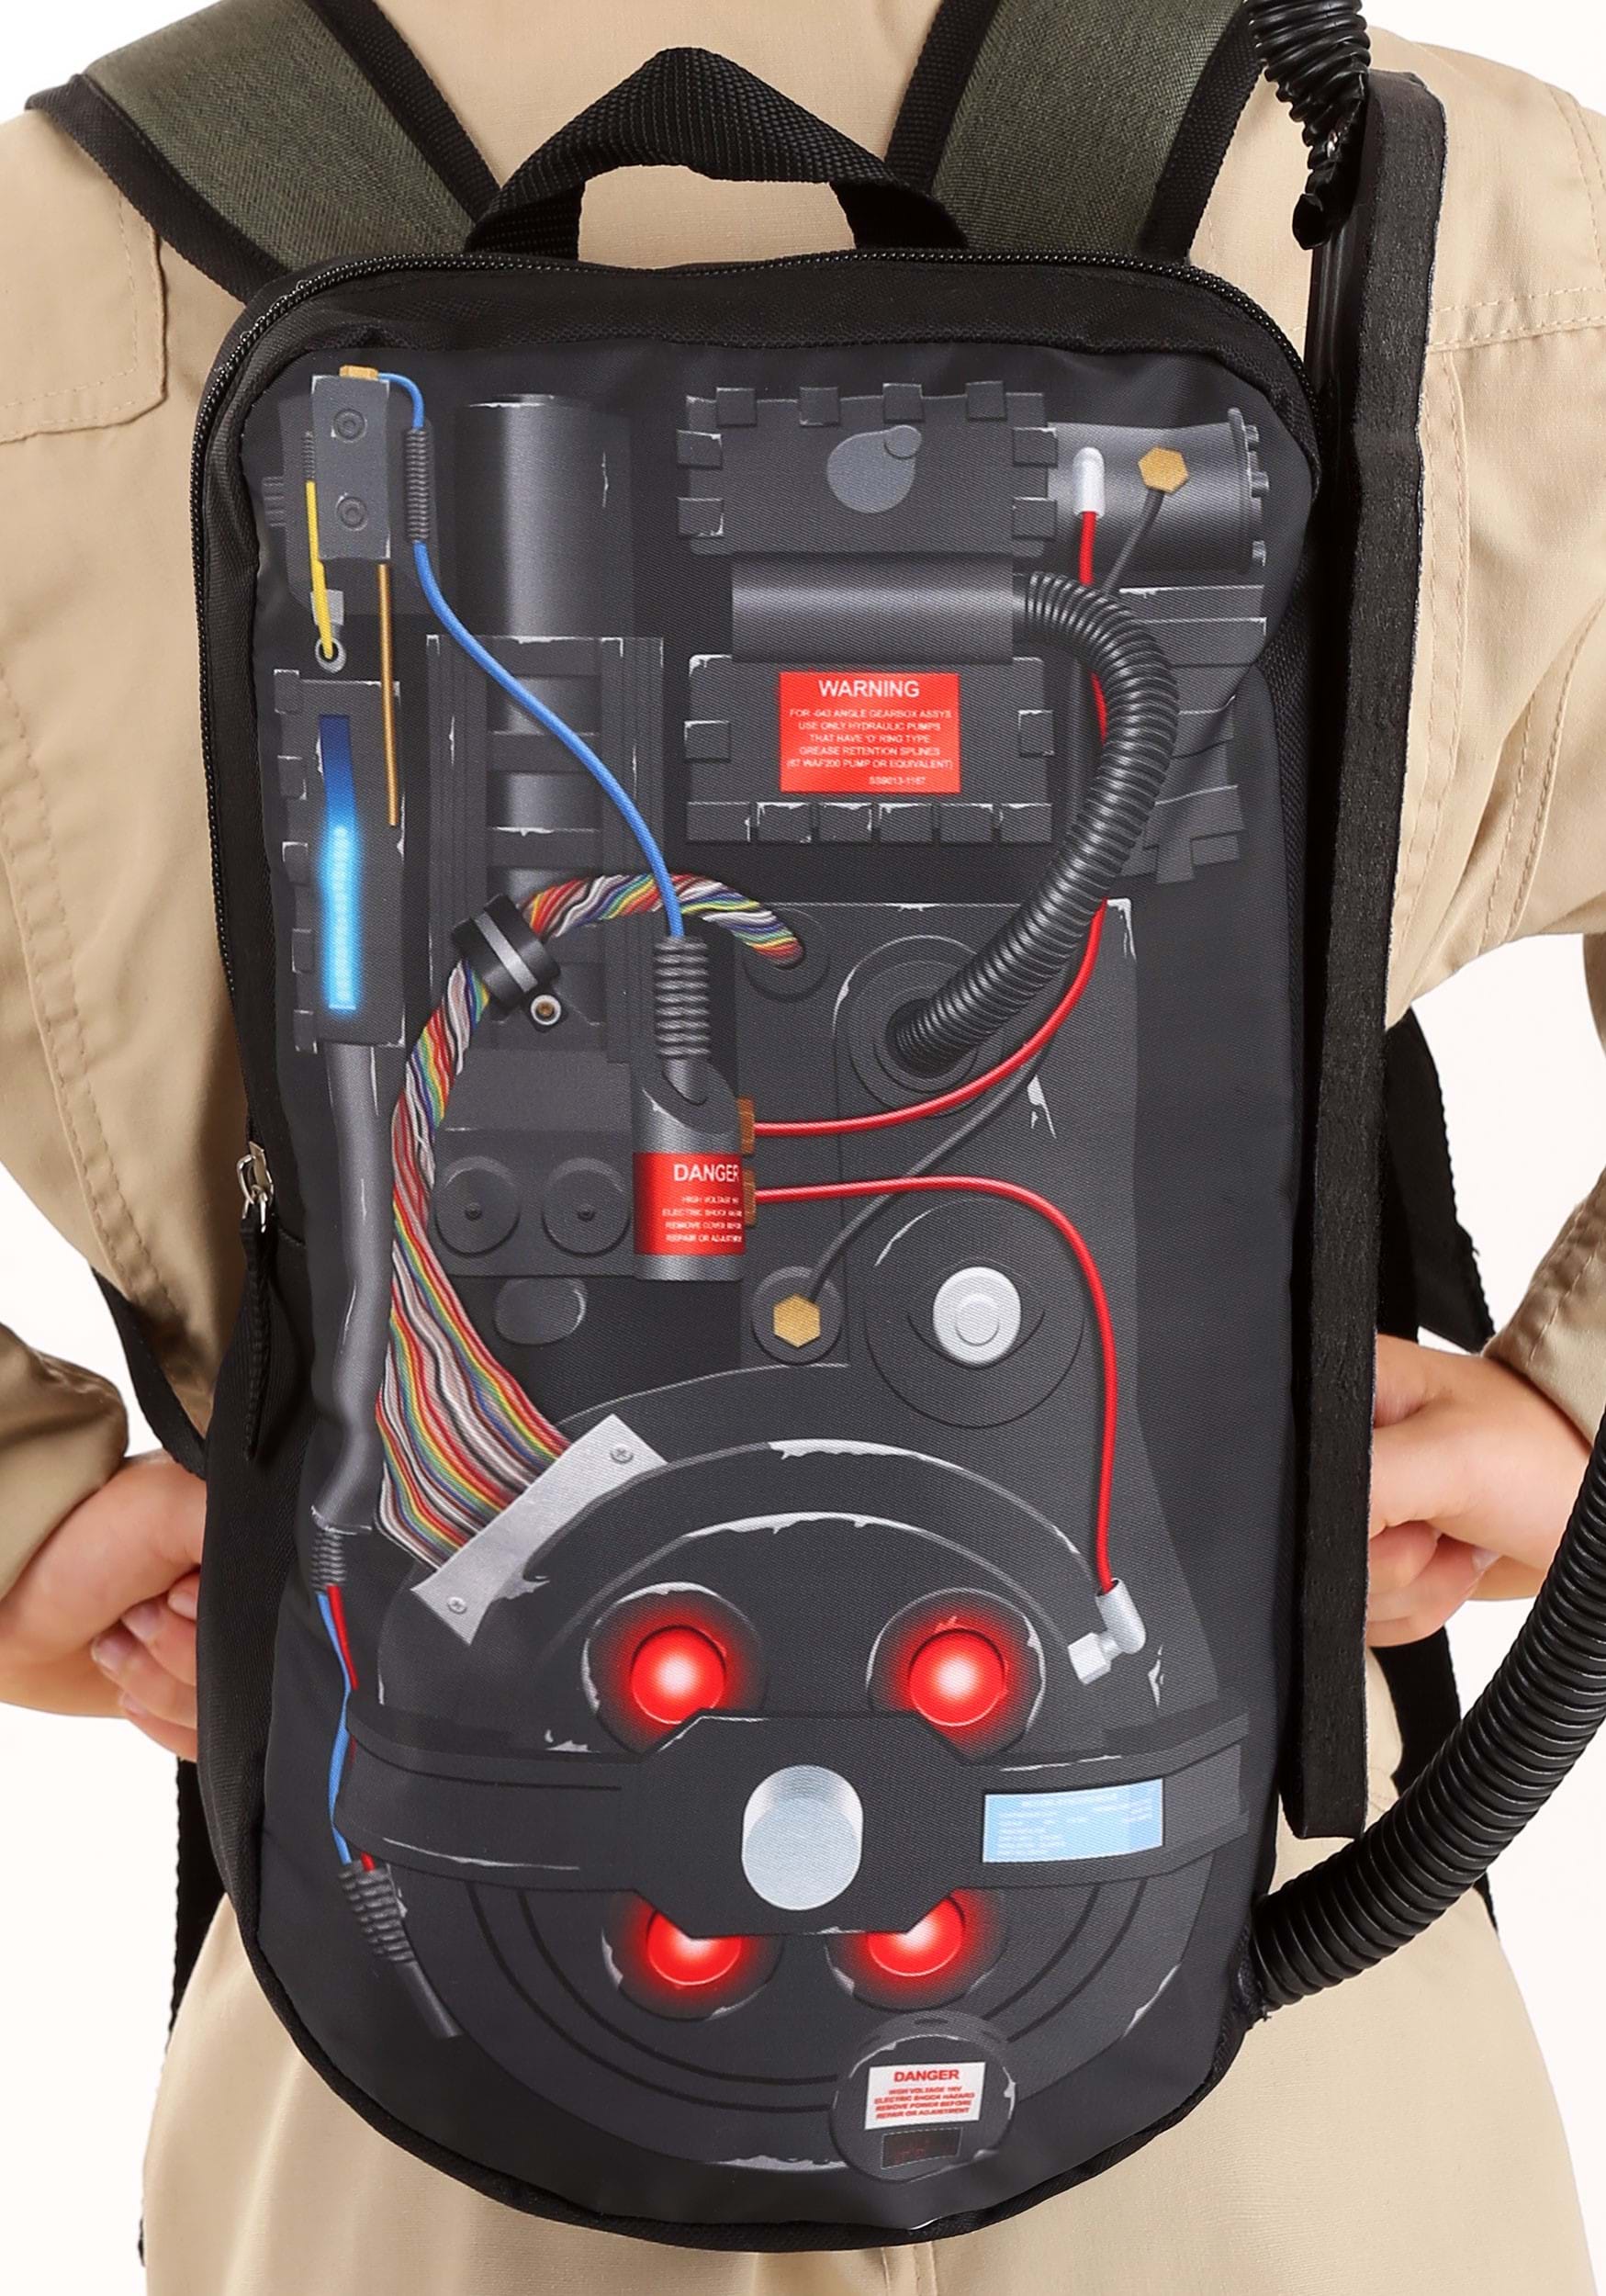 Ghostbuster Toddler Proton Pack